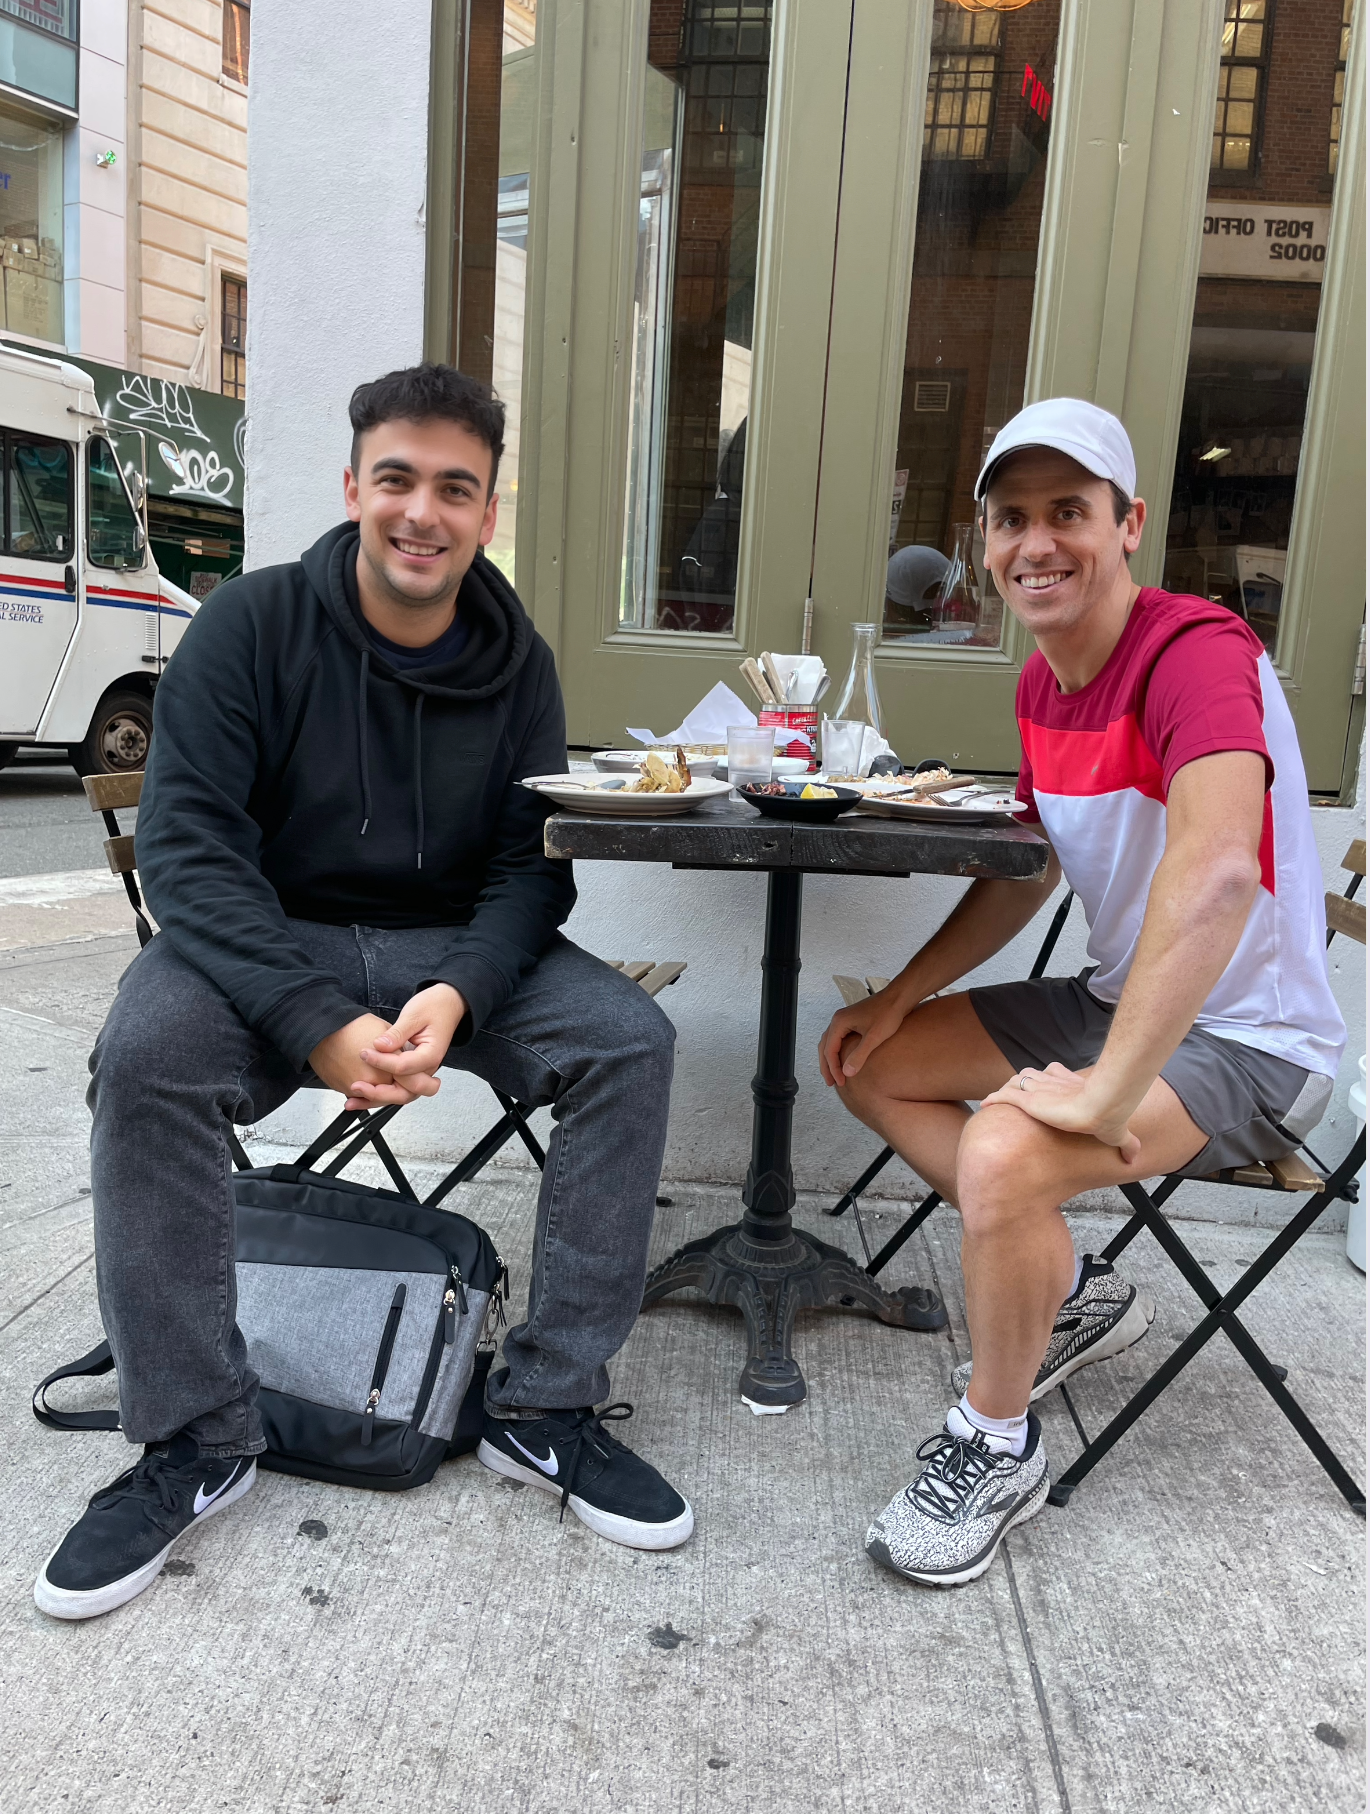 US superstar and Emmy Award winner “Oz Pearlman” having a relaxed lunch in Manhattan. He is also part of Sven's long-standing customer base